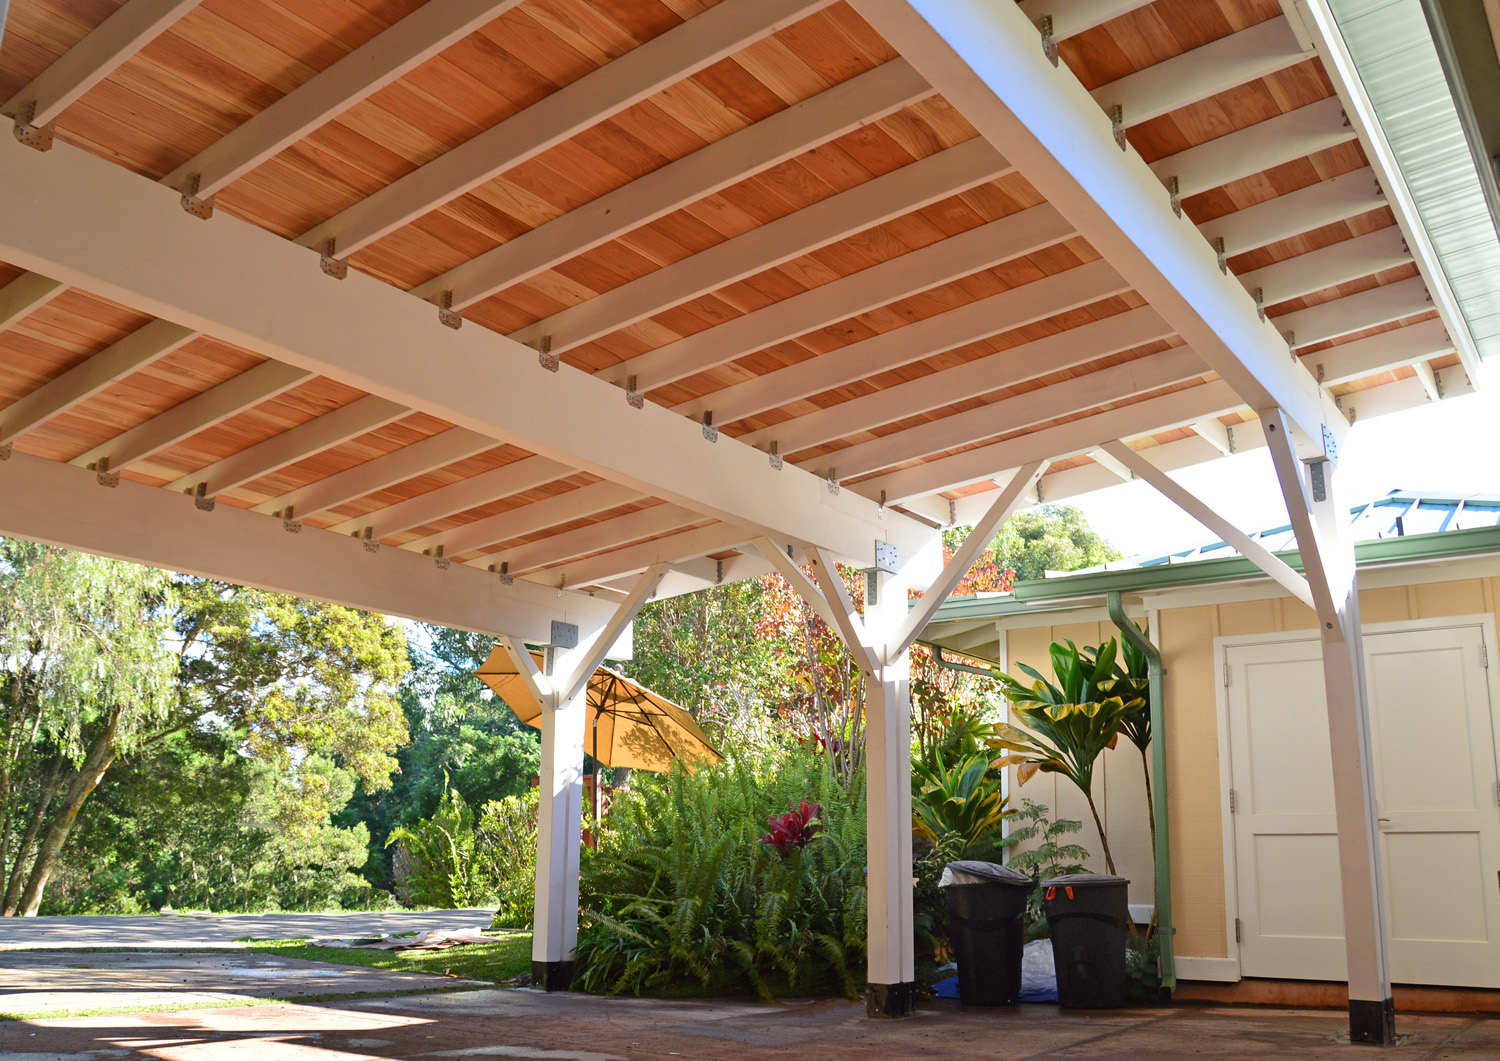 Carport Pavilion in California Redwood. Unfinished ceiling by custom request.